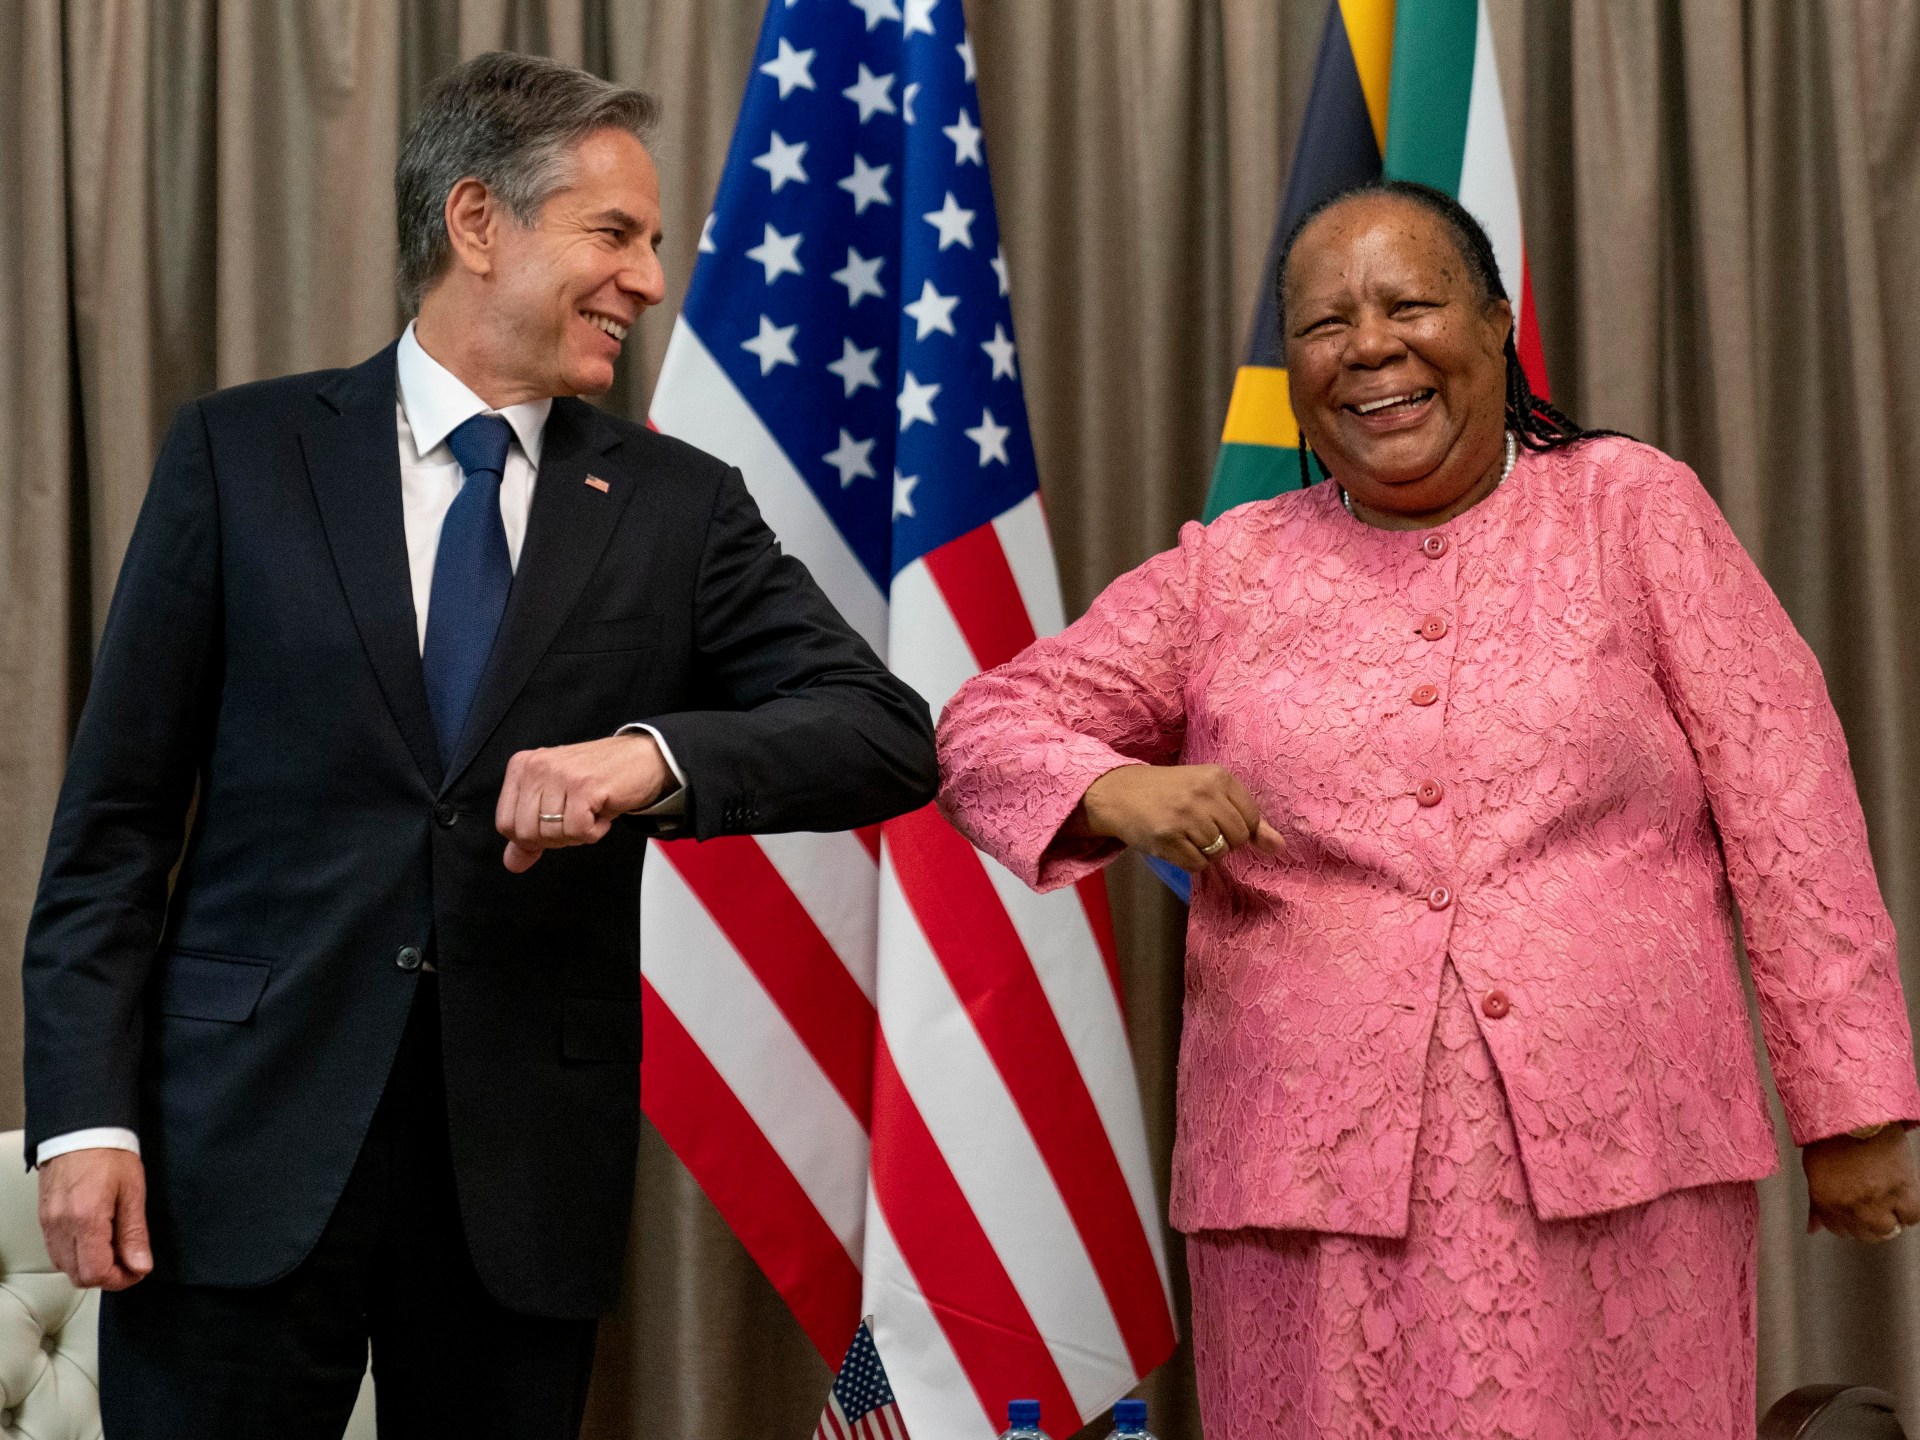 Are US-South Africa ties at breaking point over Israel’s war on Gaza?